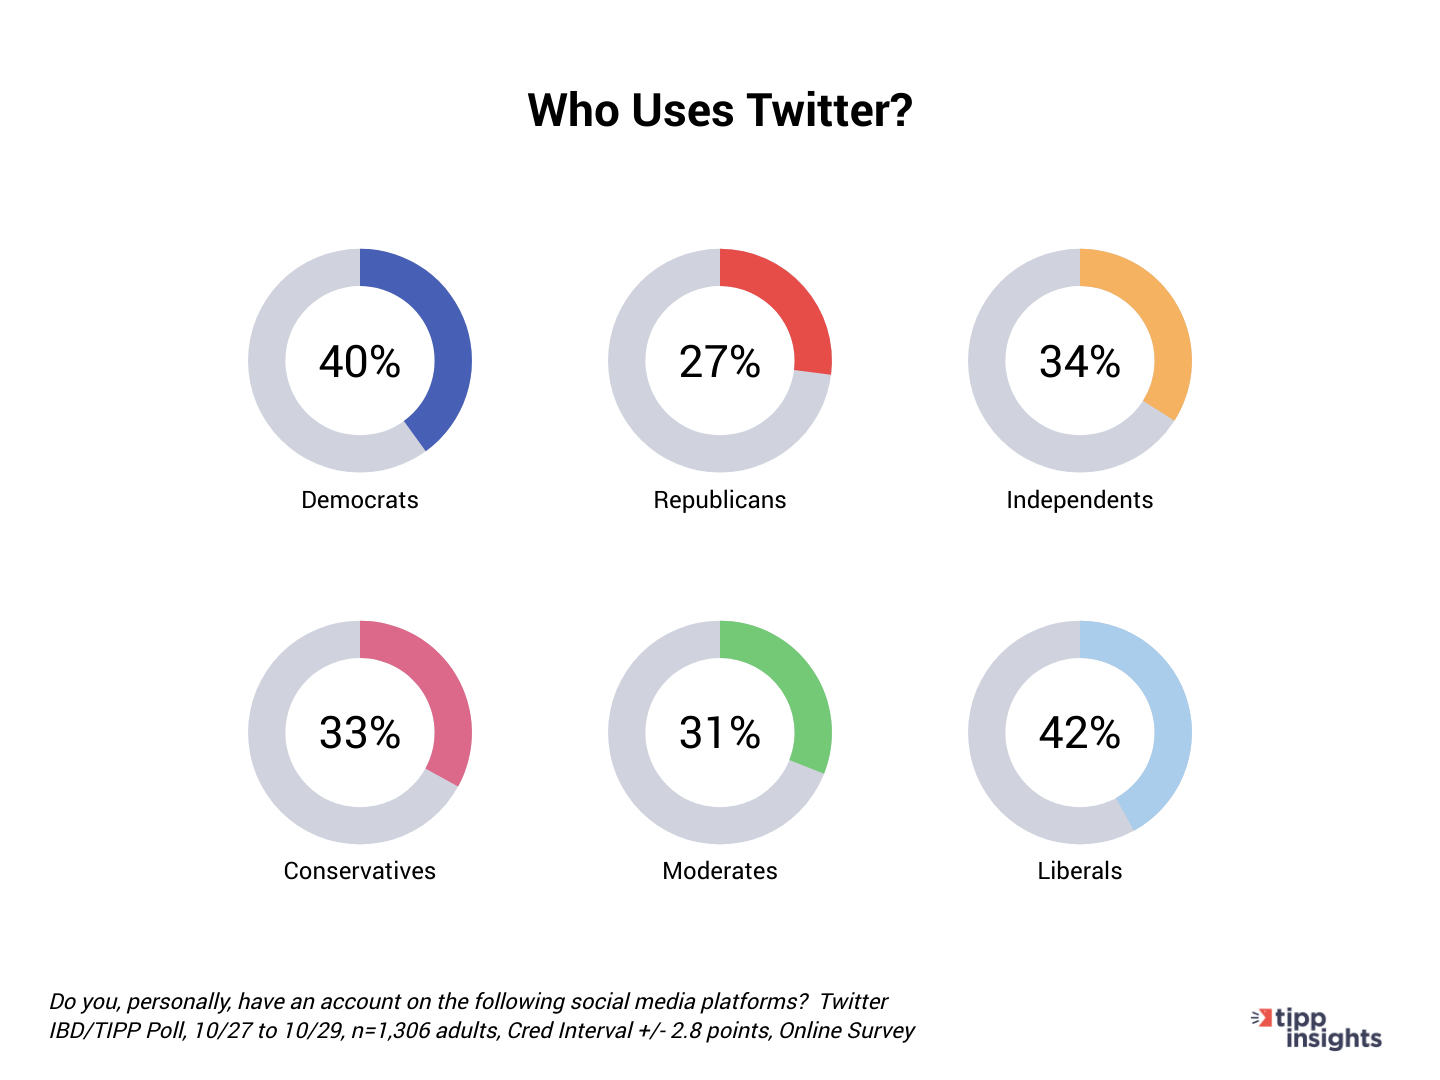 IBD/TIPP Poll Results: Who uses Twitter? Ideology and Political part